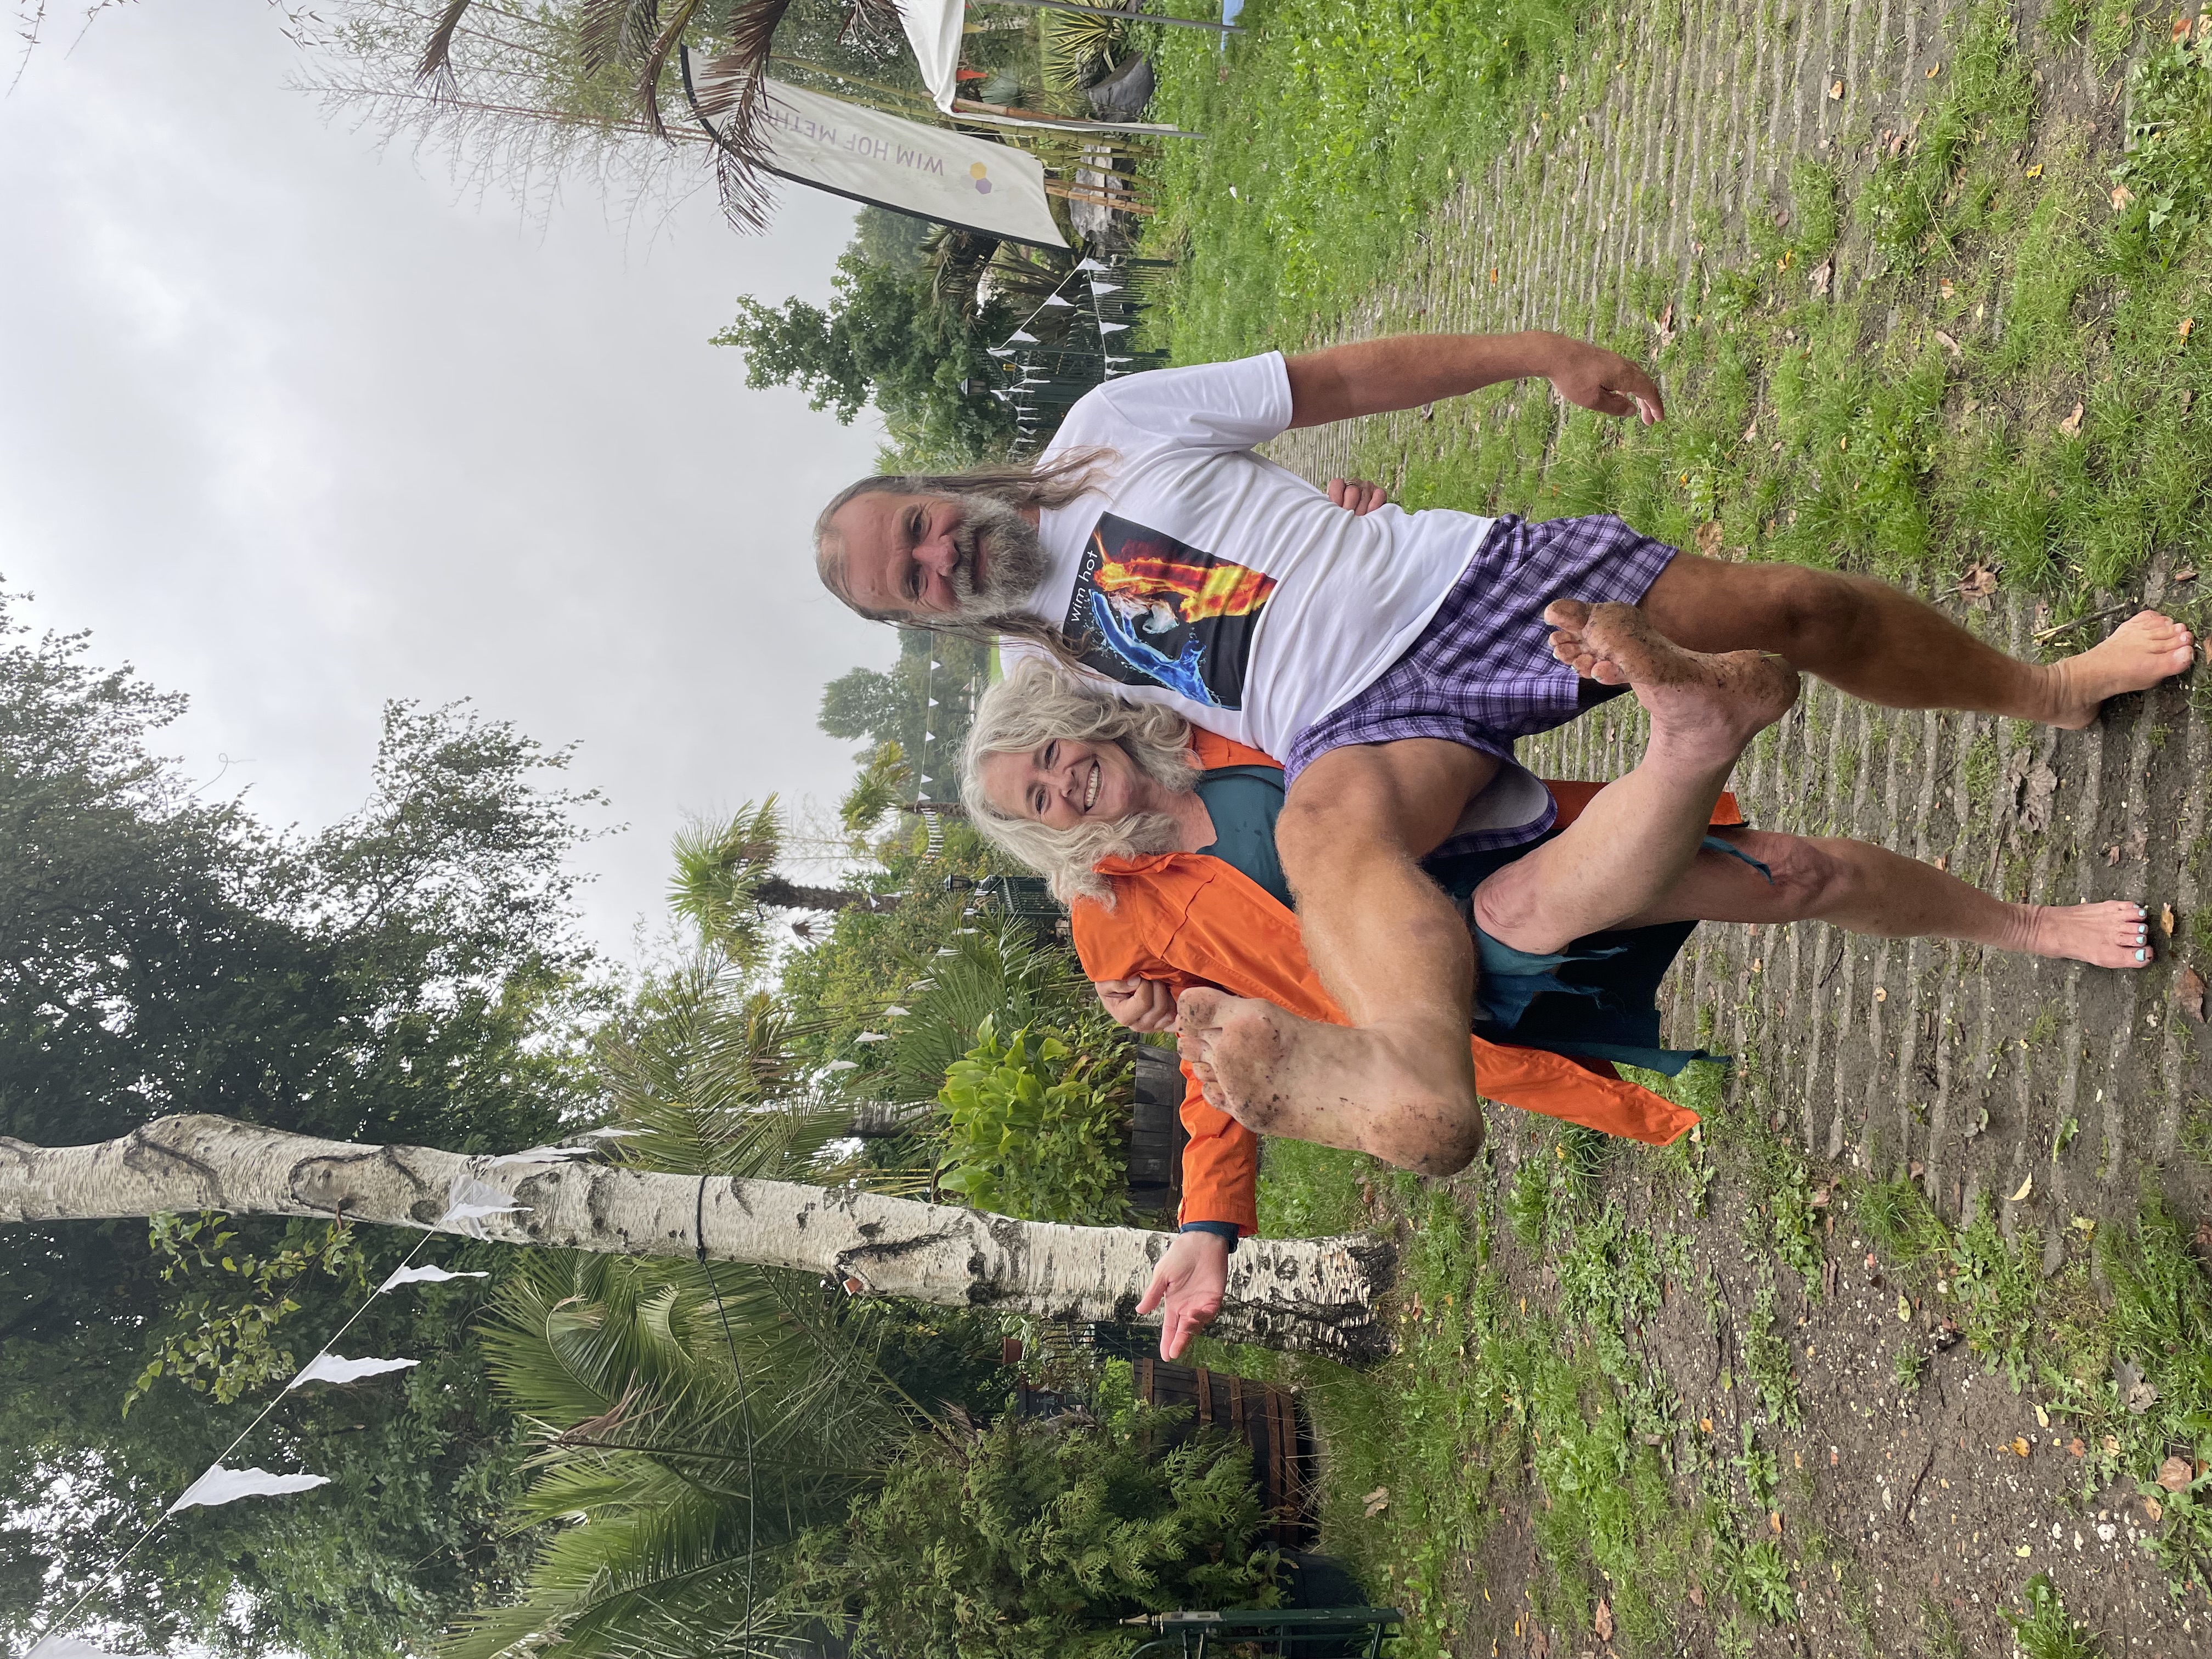 Wim Hof and Sue Barefoot at his home in Holland. 2022